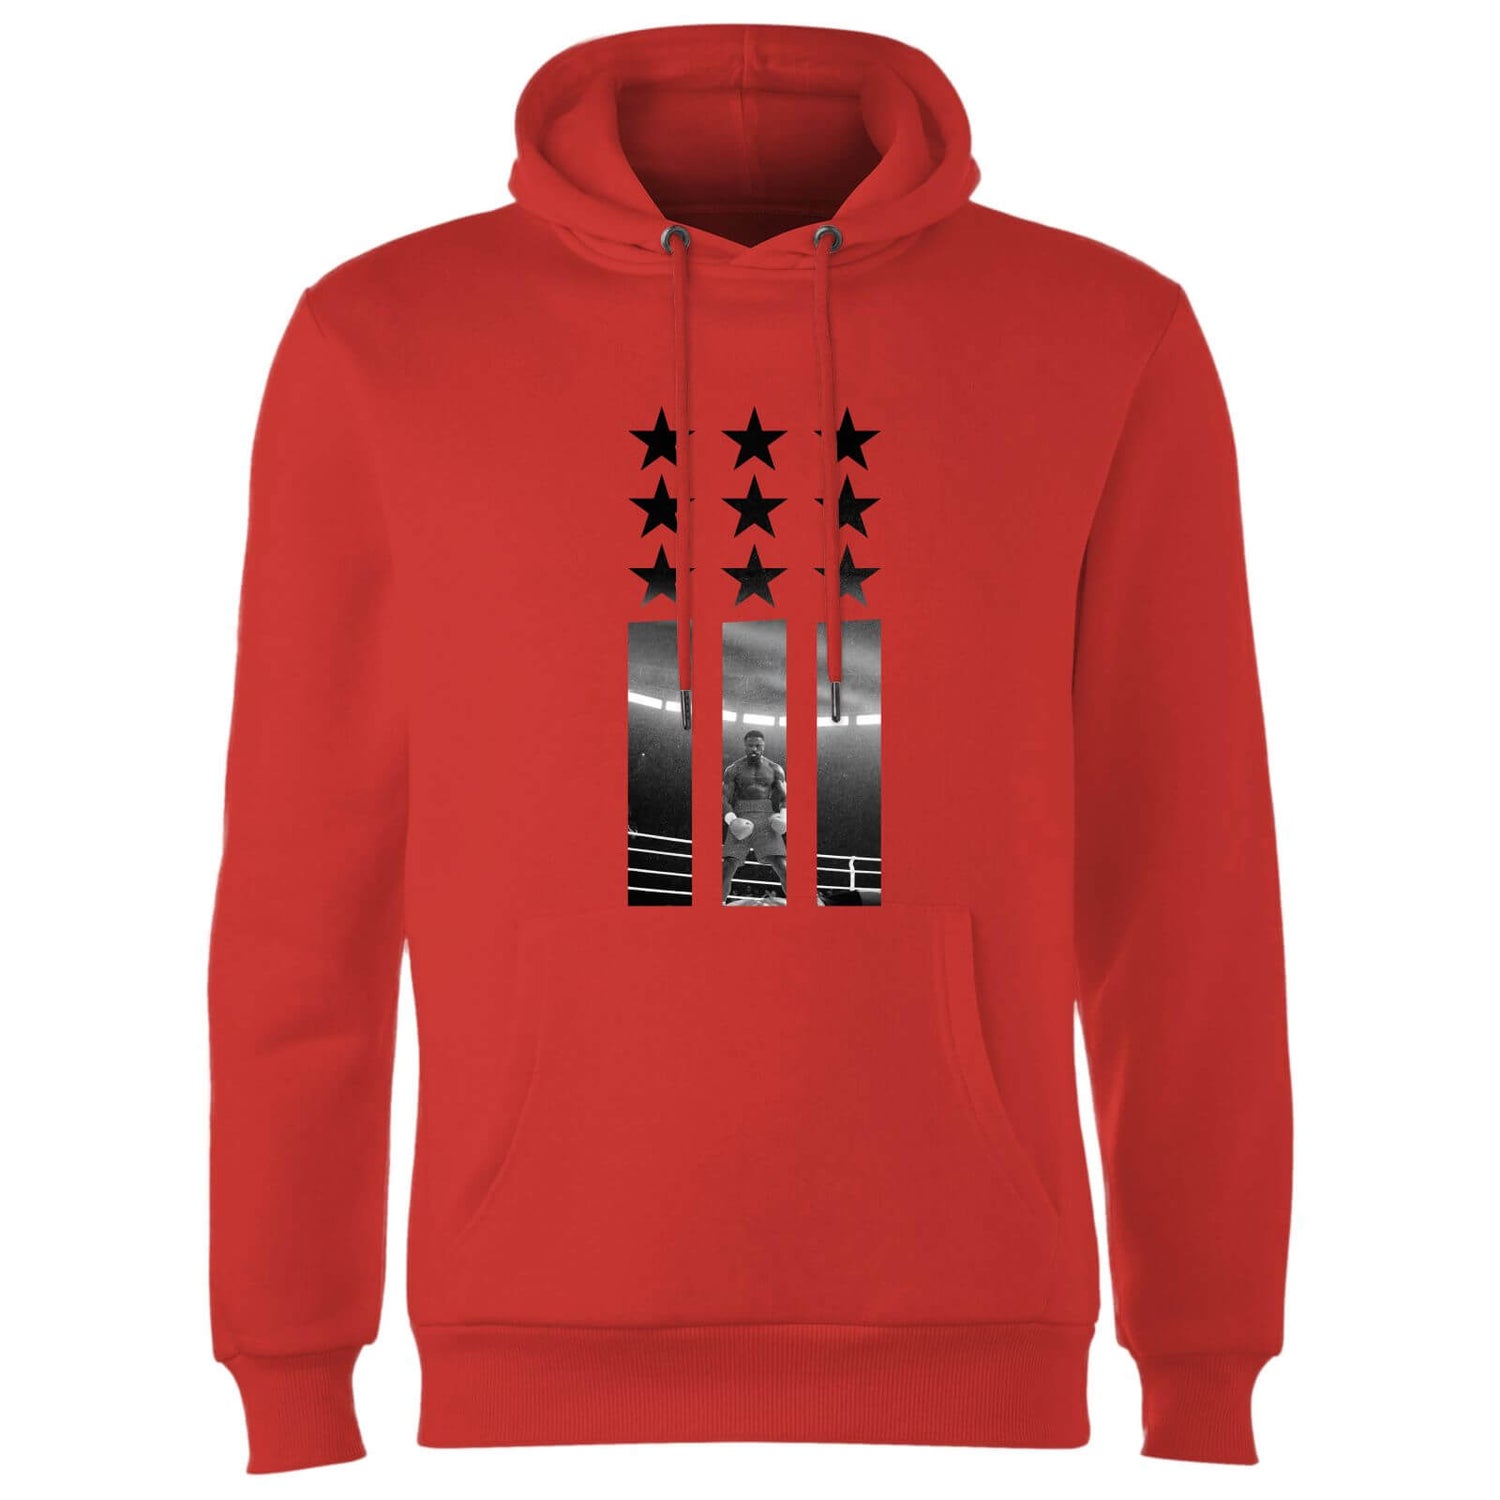 Creed Poster Stars Hoodie - Red